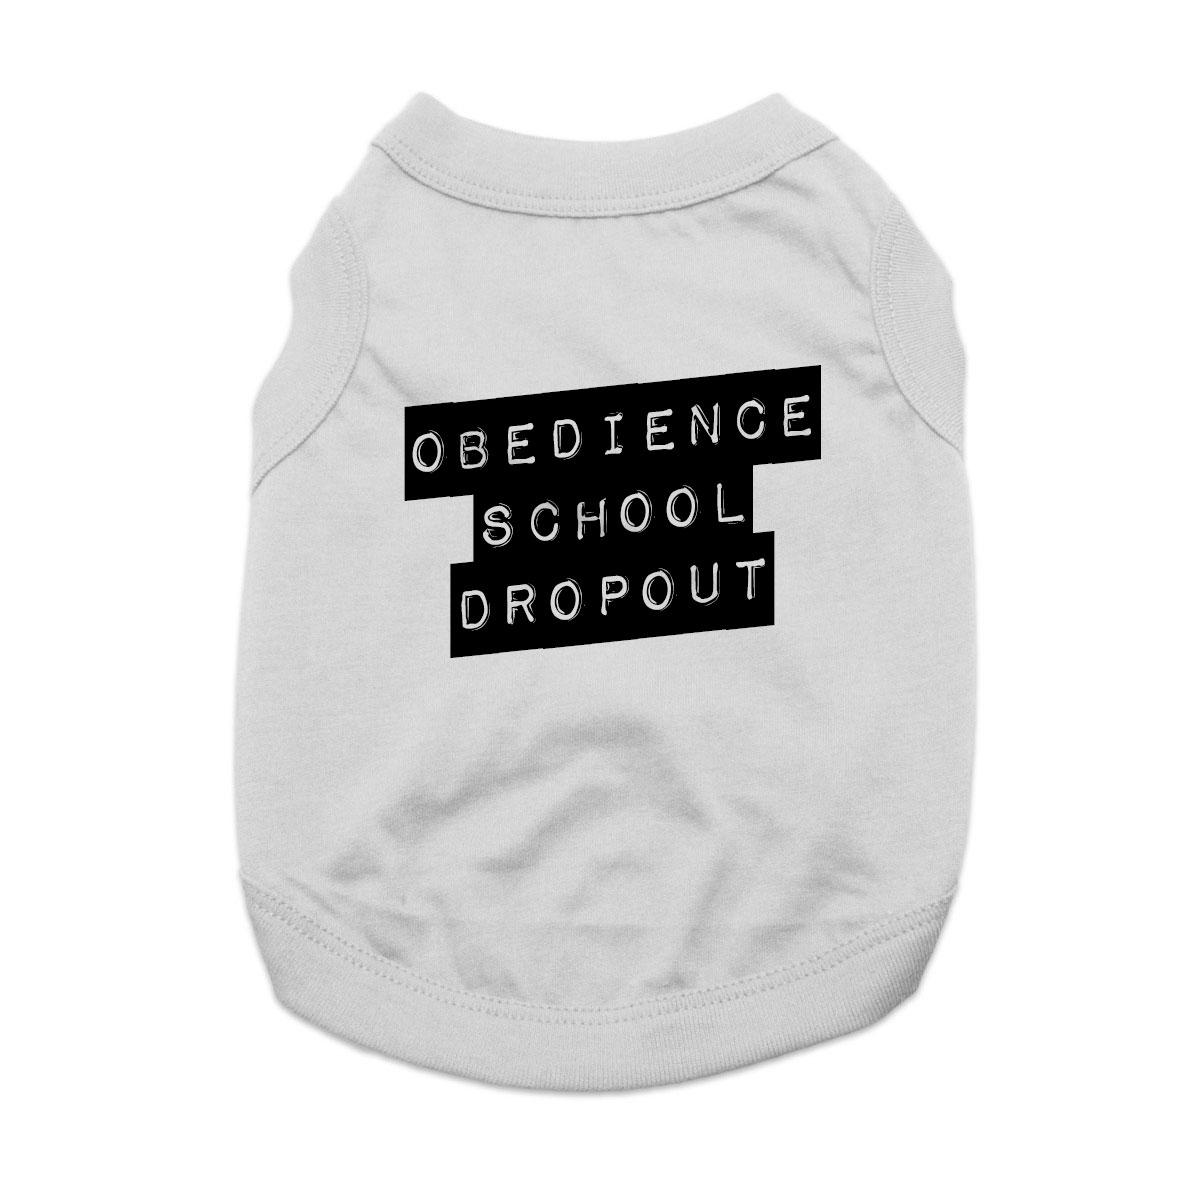 Obedience School Dropout Dog Shirt - Gray